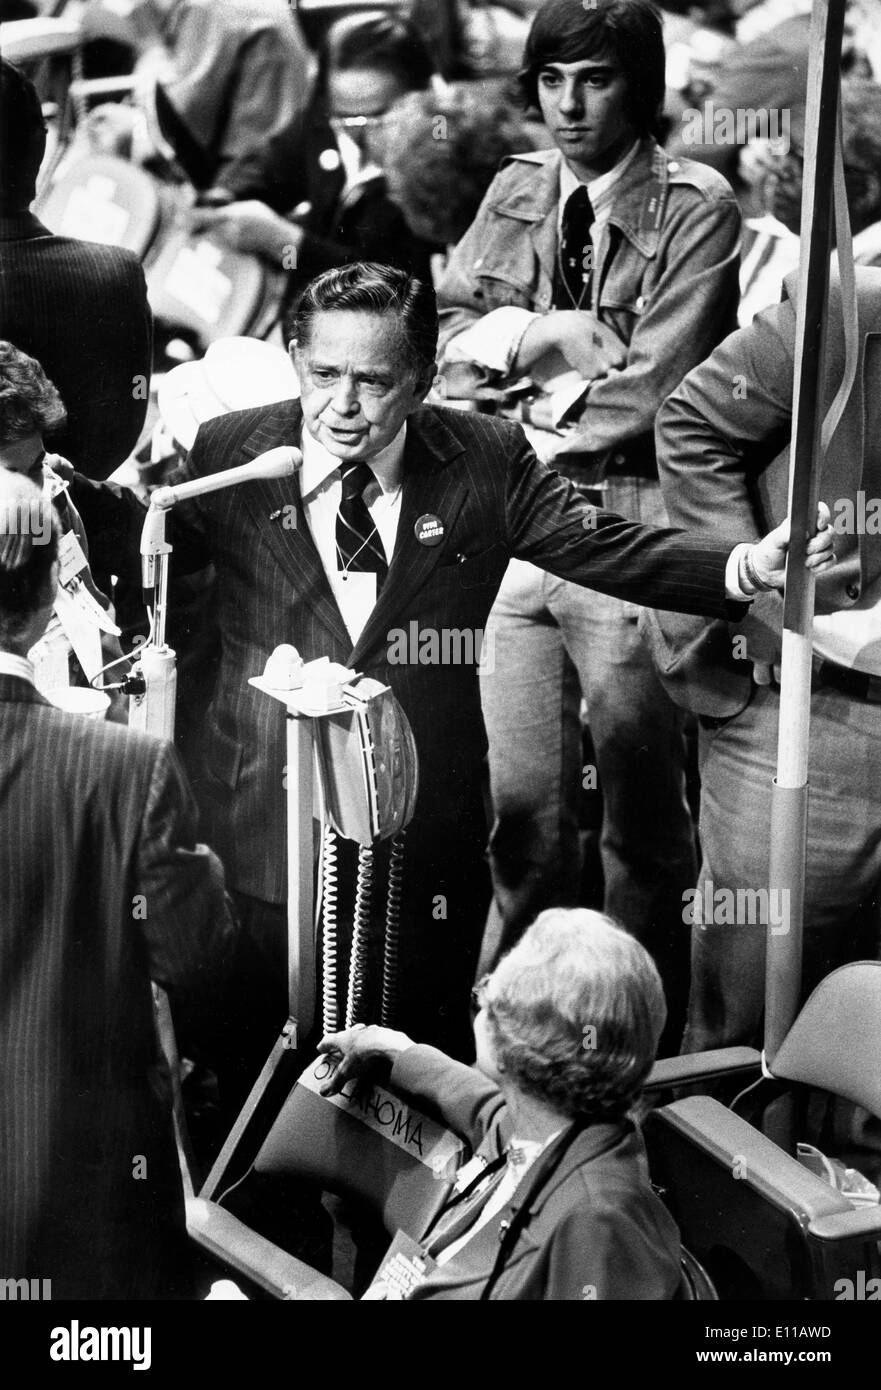 Jul 06, 1976; New York, NY, USA; Speaker of the House of Representatives of the 92nd Congress, Mr. CARL ALBERT, at the National Stock Photo